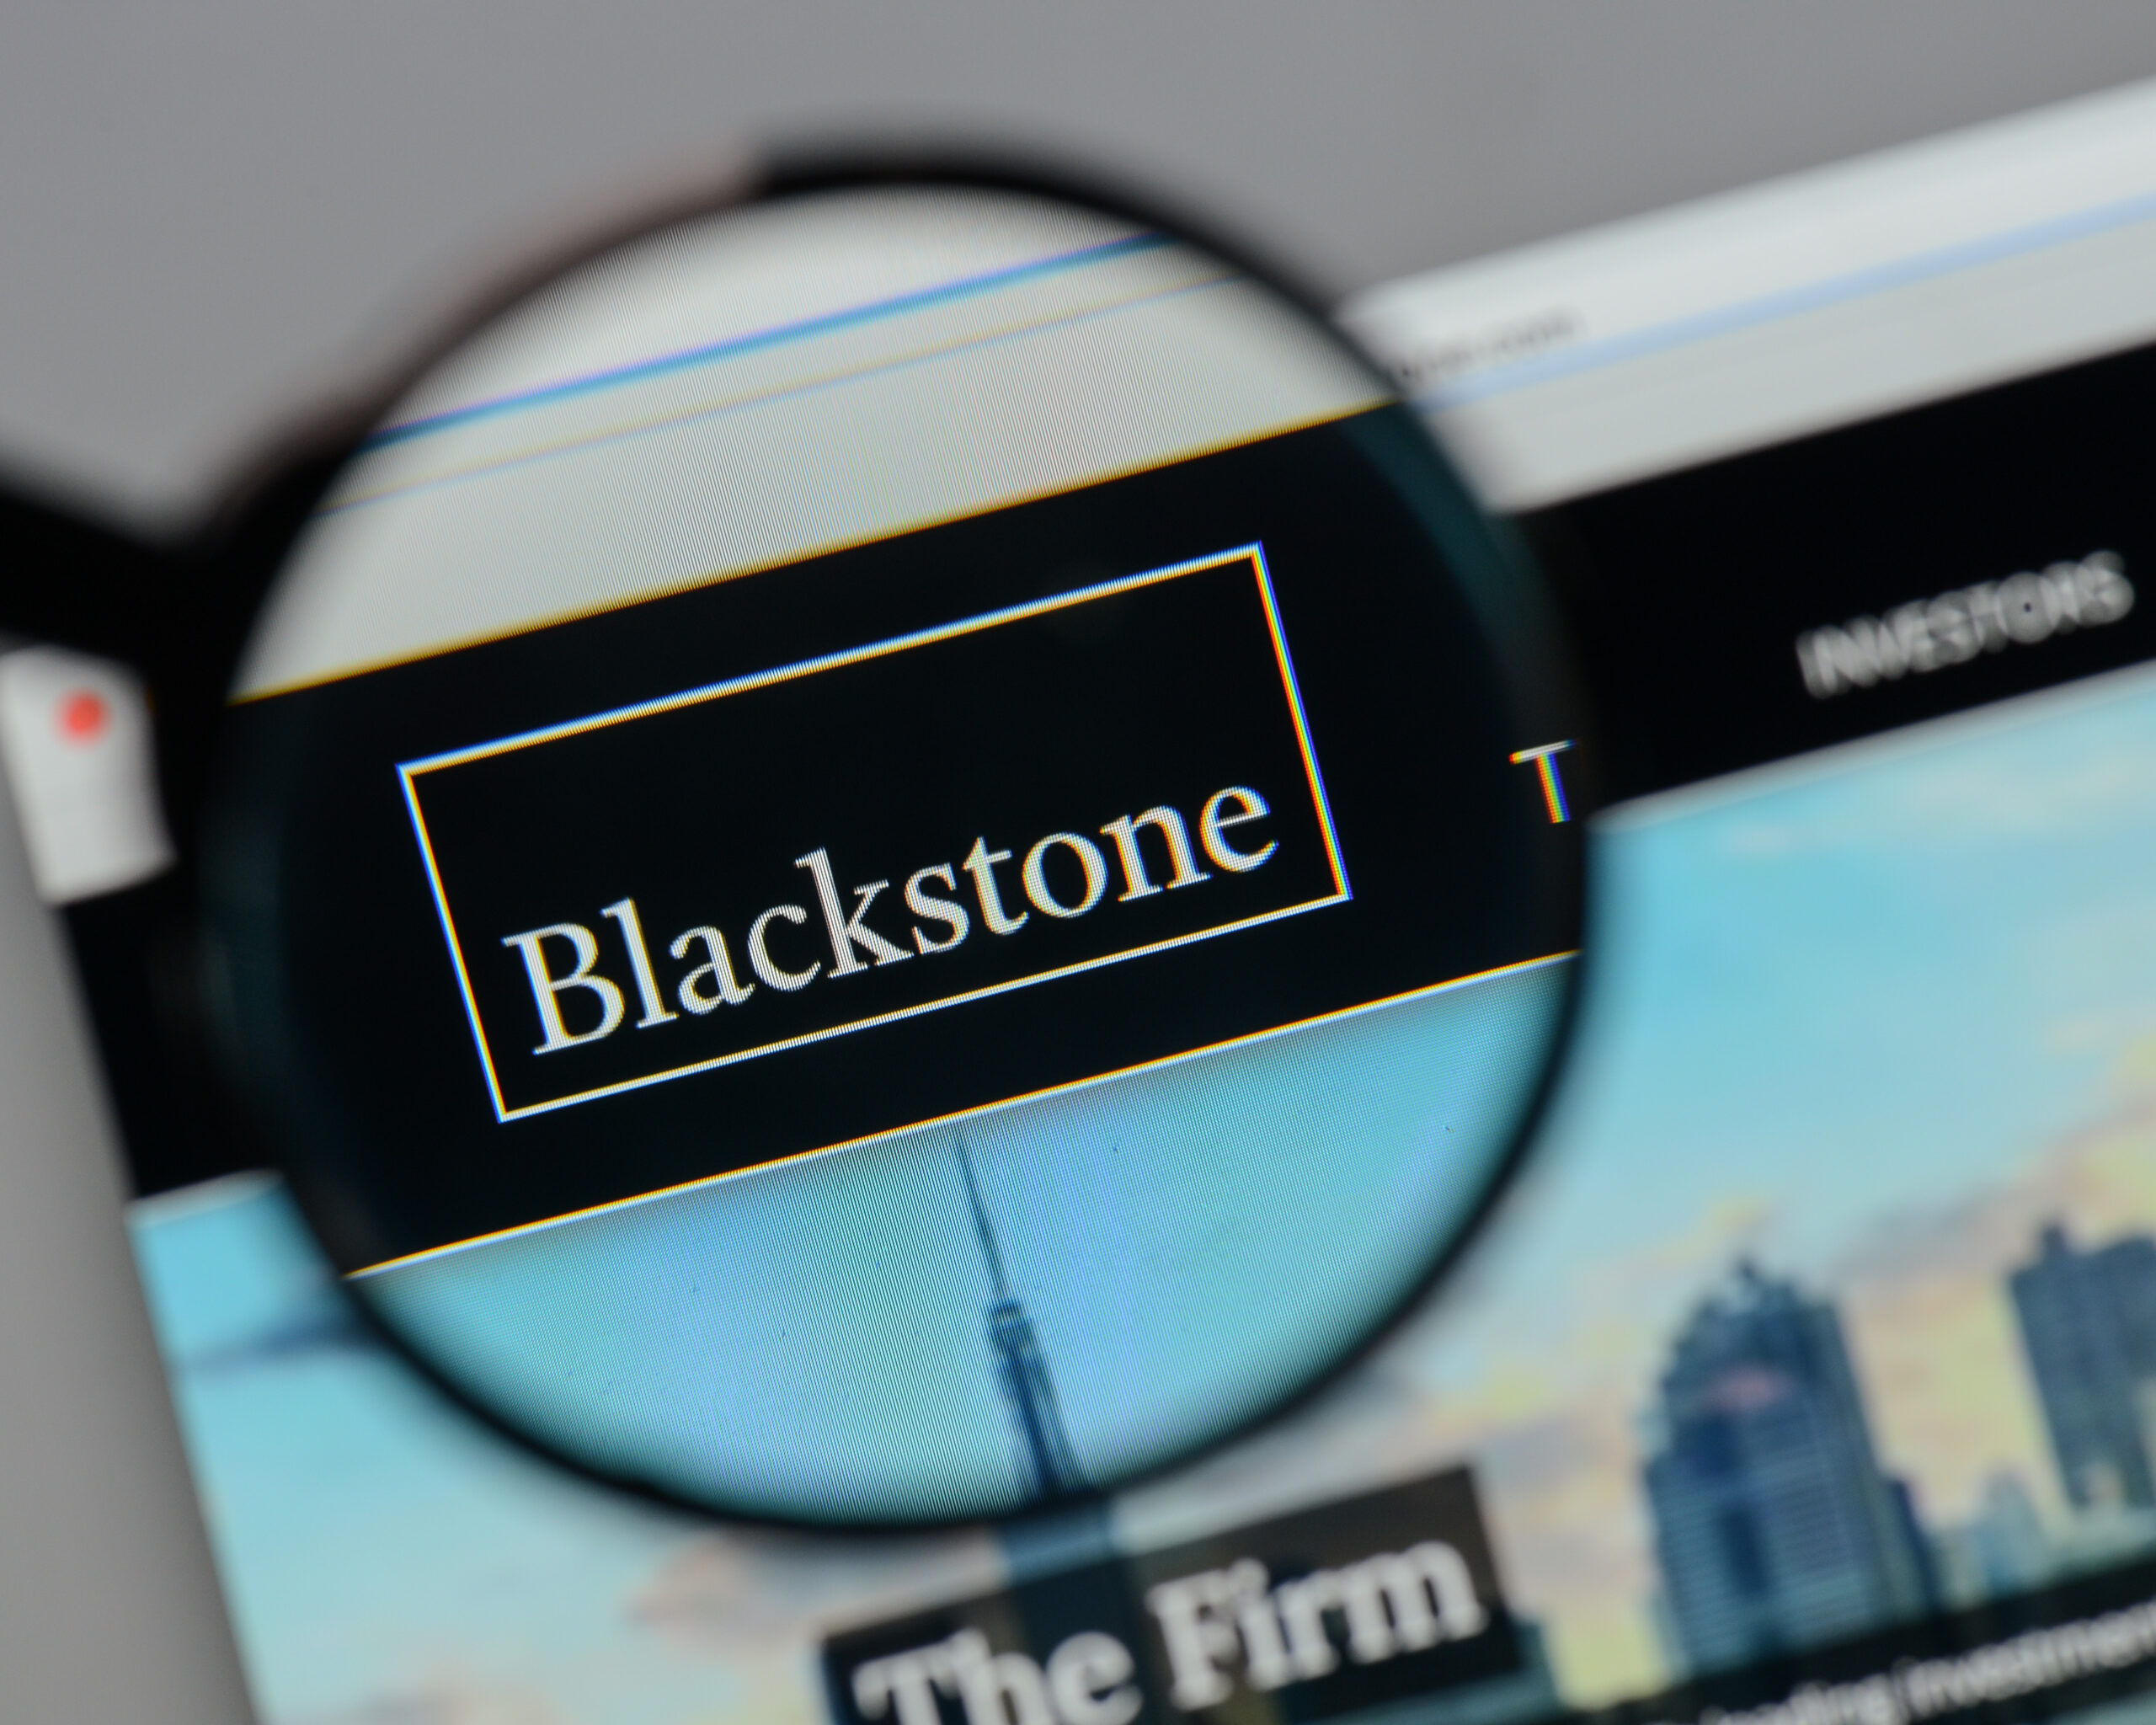 6 reasons why Blackstone shares are massively undervalued